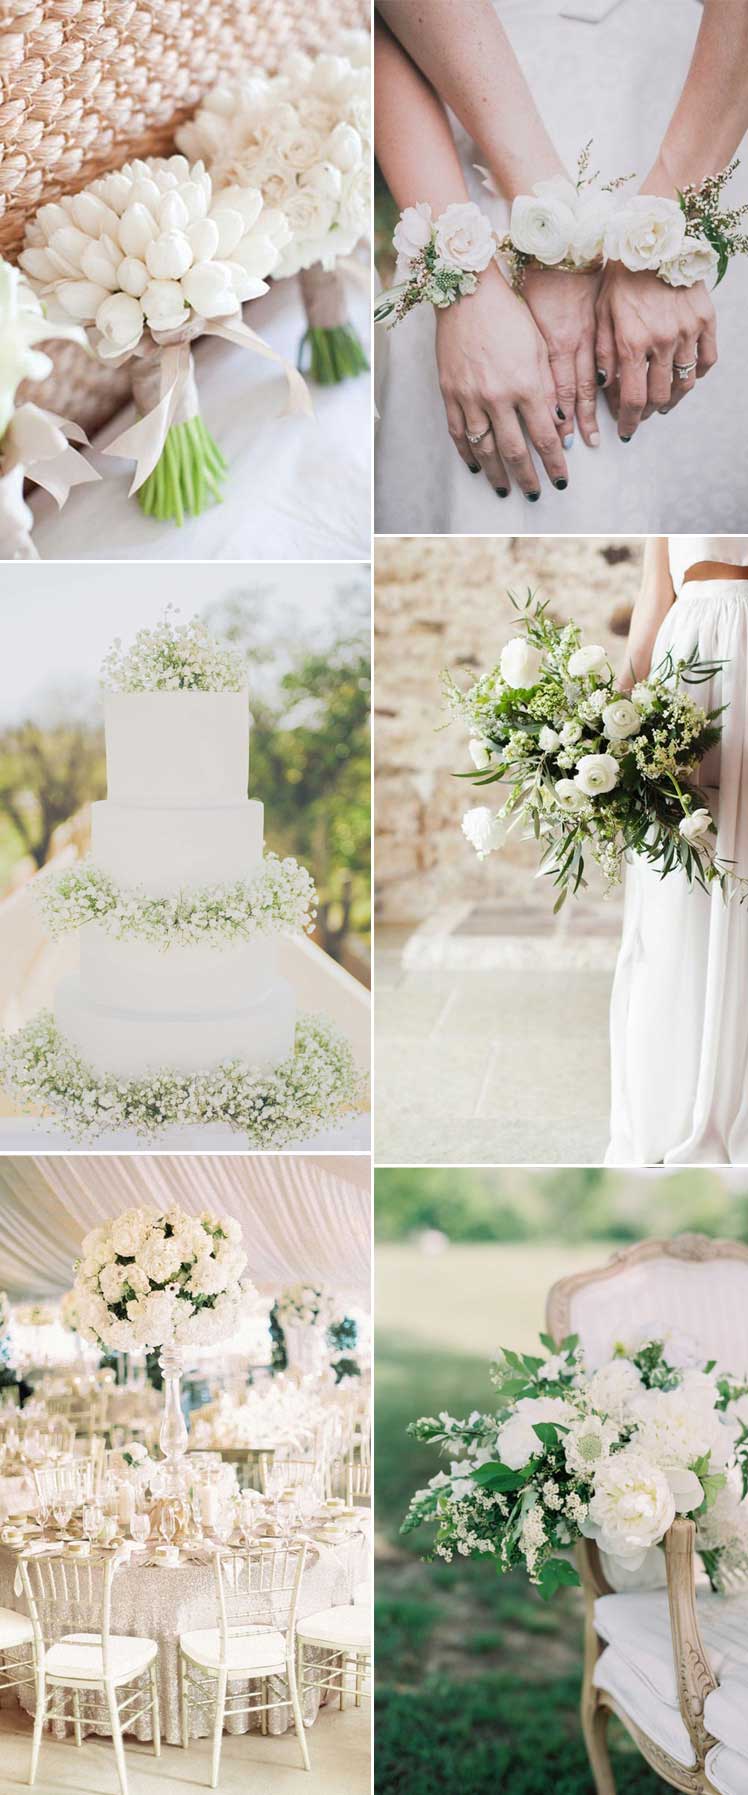 White flowers inspiration for a spring wedding